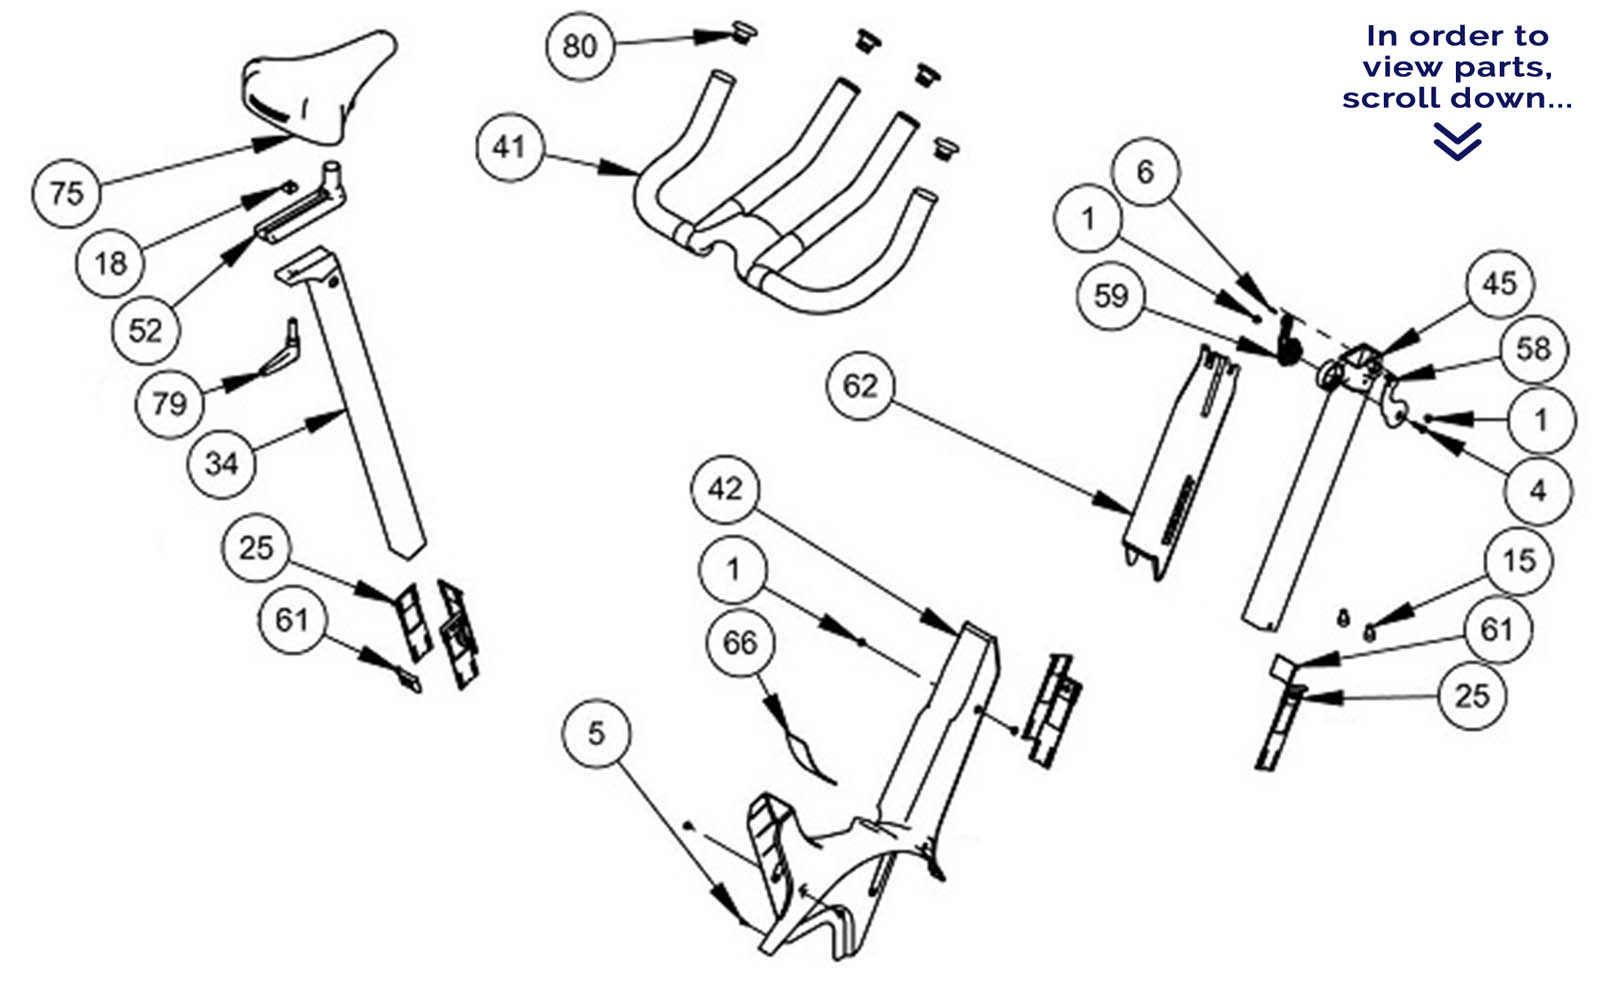 Keiser M3 Handlebar Seat Parts---Scroll down to view parts